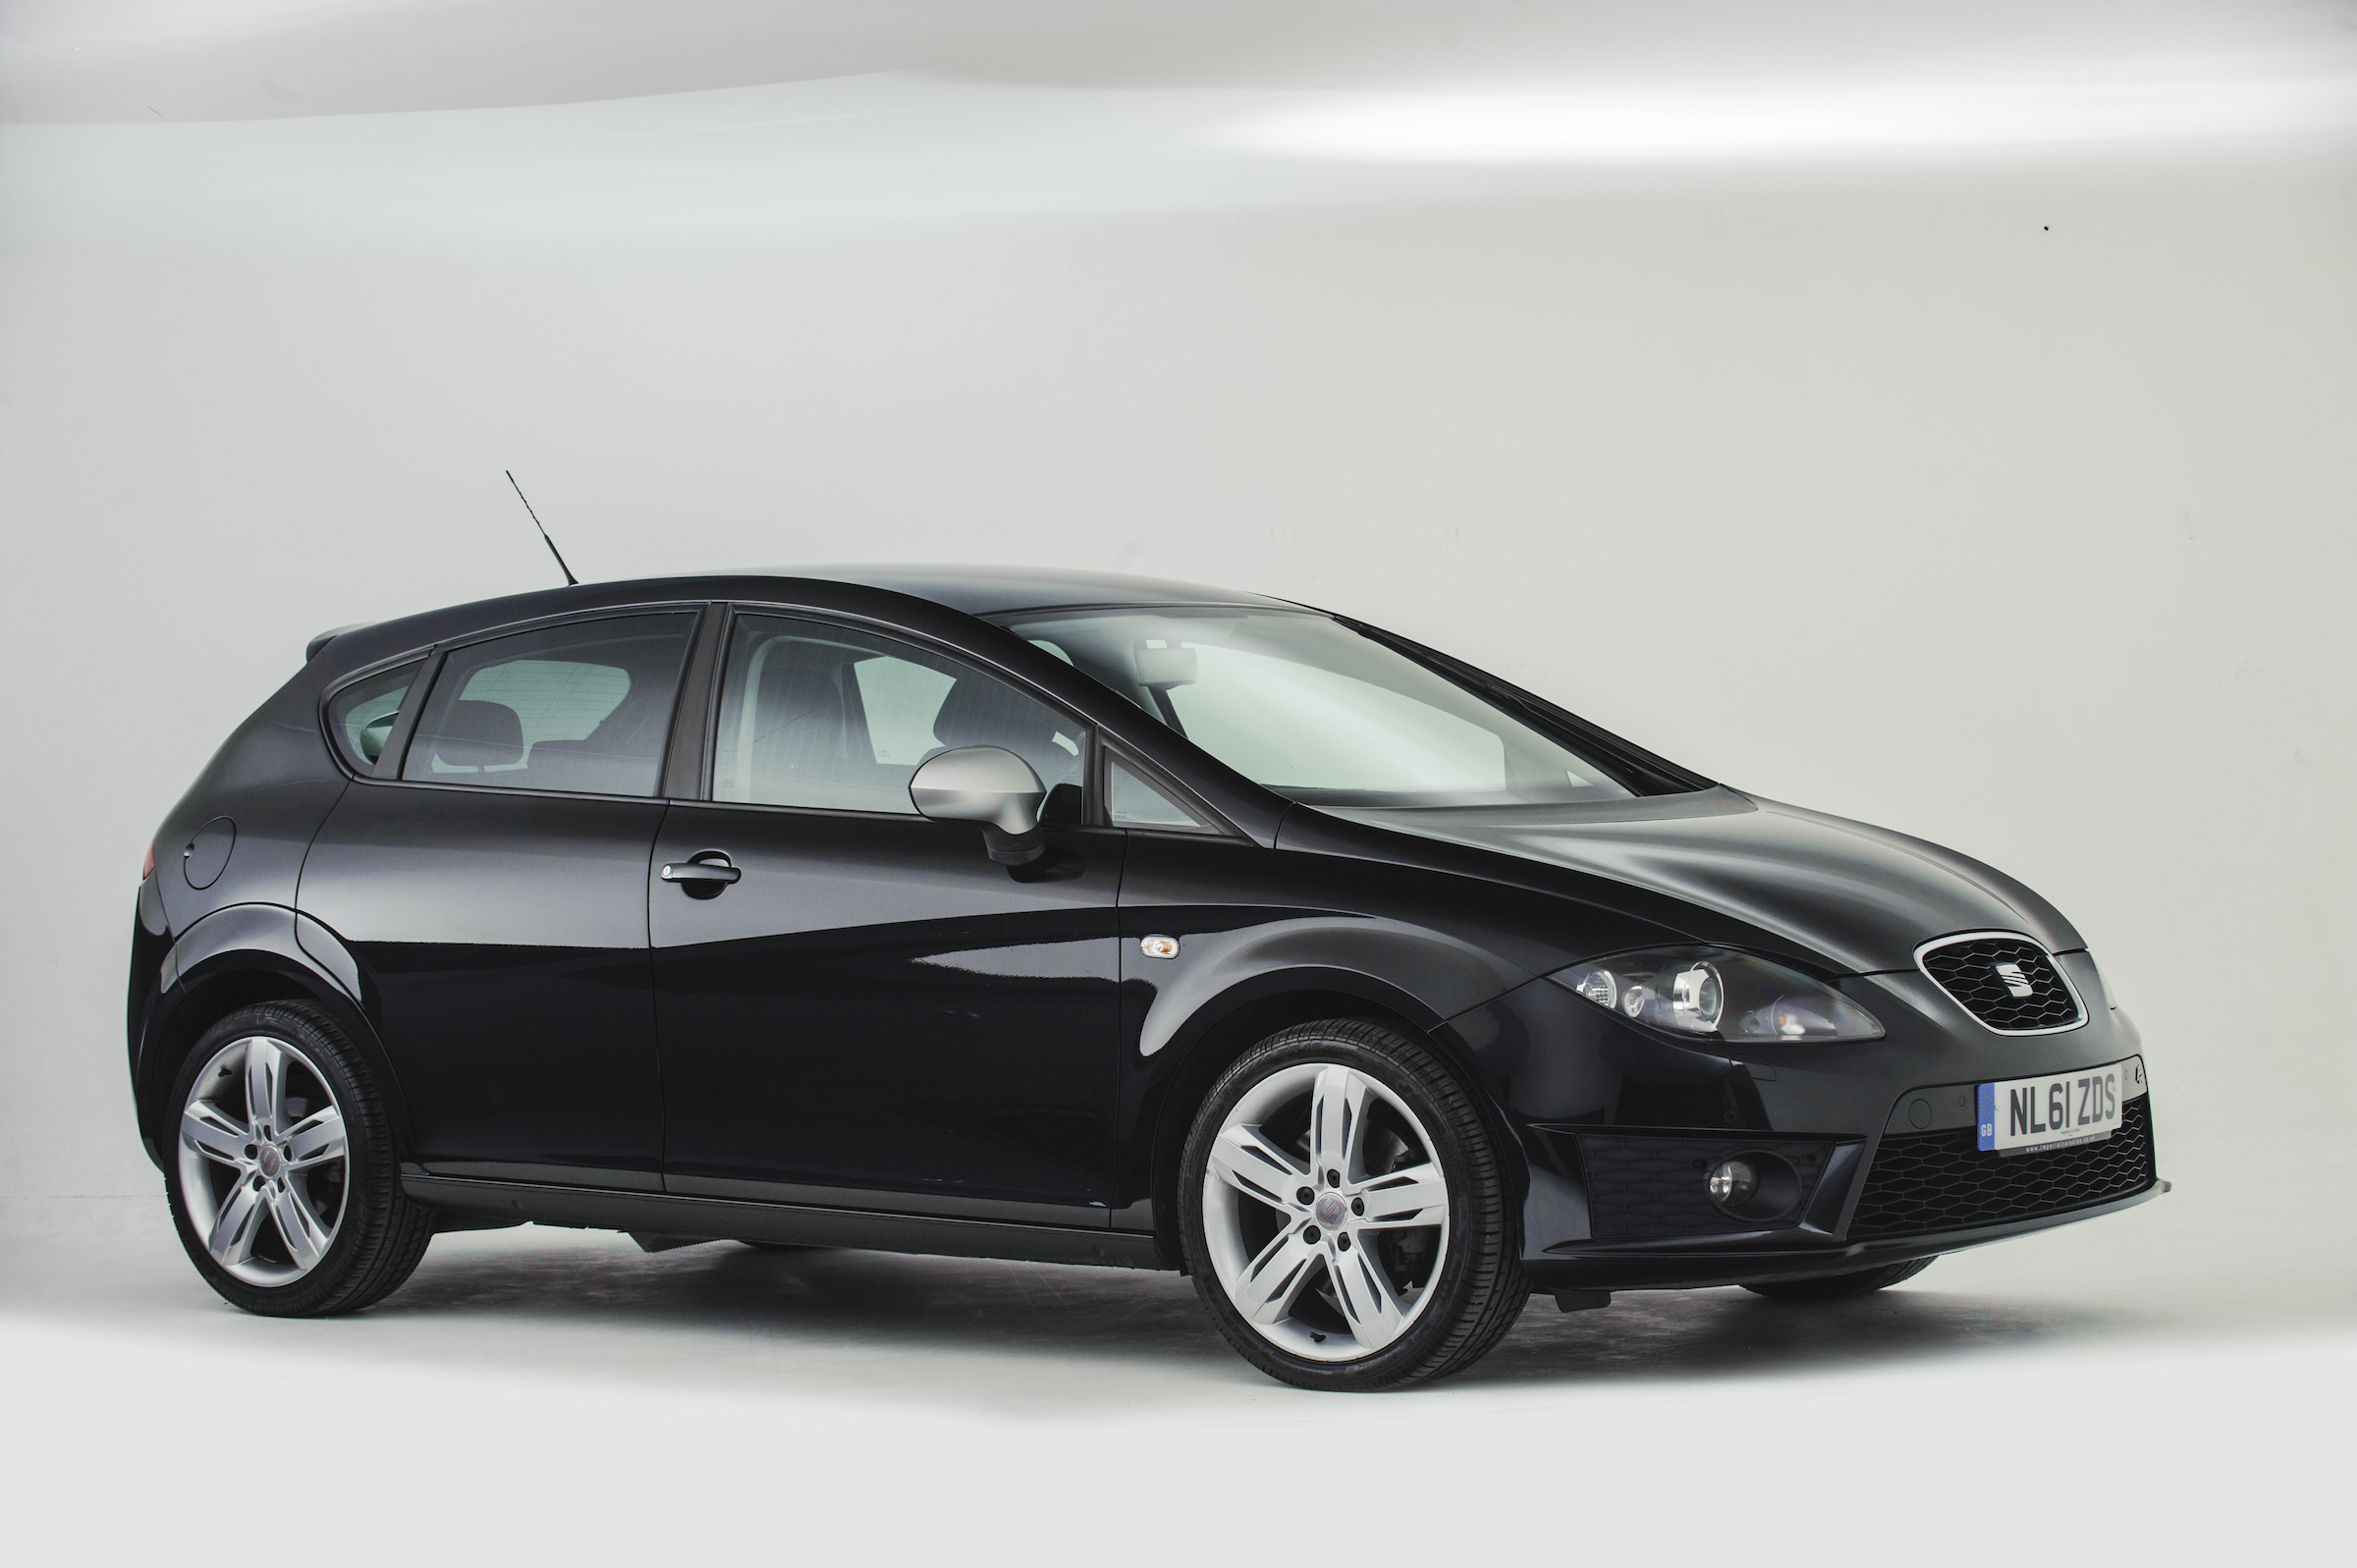 https://mediacloud.carbuyer.co.uk/image/private/s--DPNw5dHE--/v1579625870/carbuyer/seat_leon_001_2.jpg